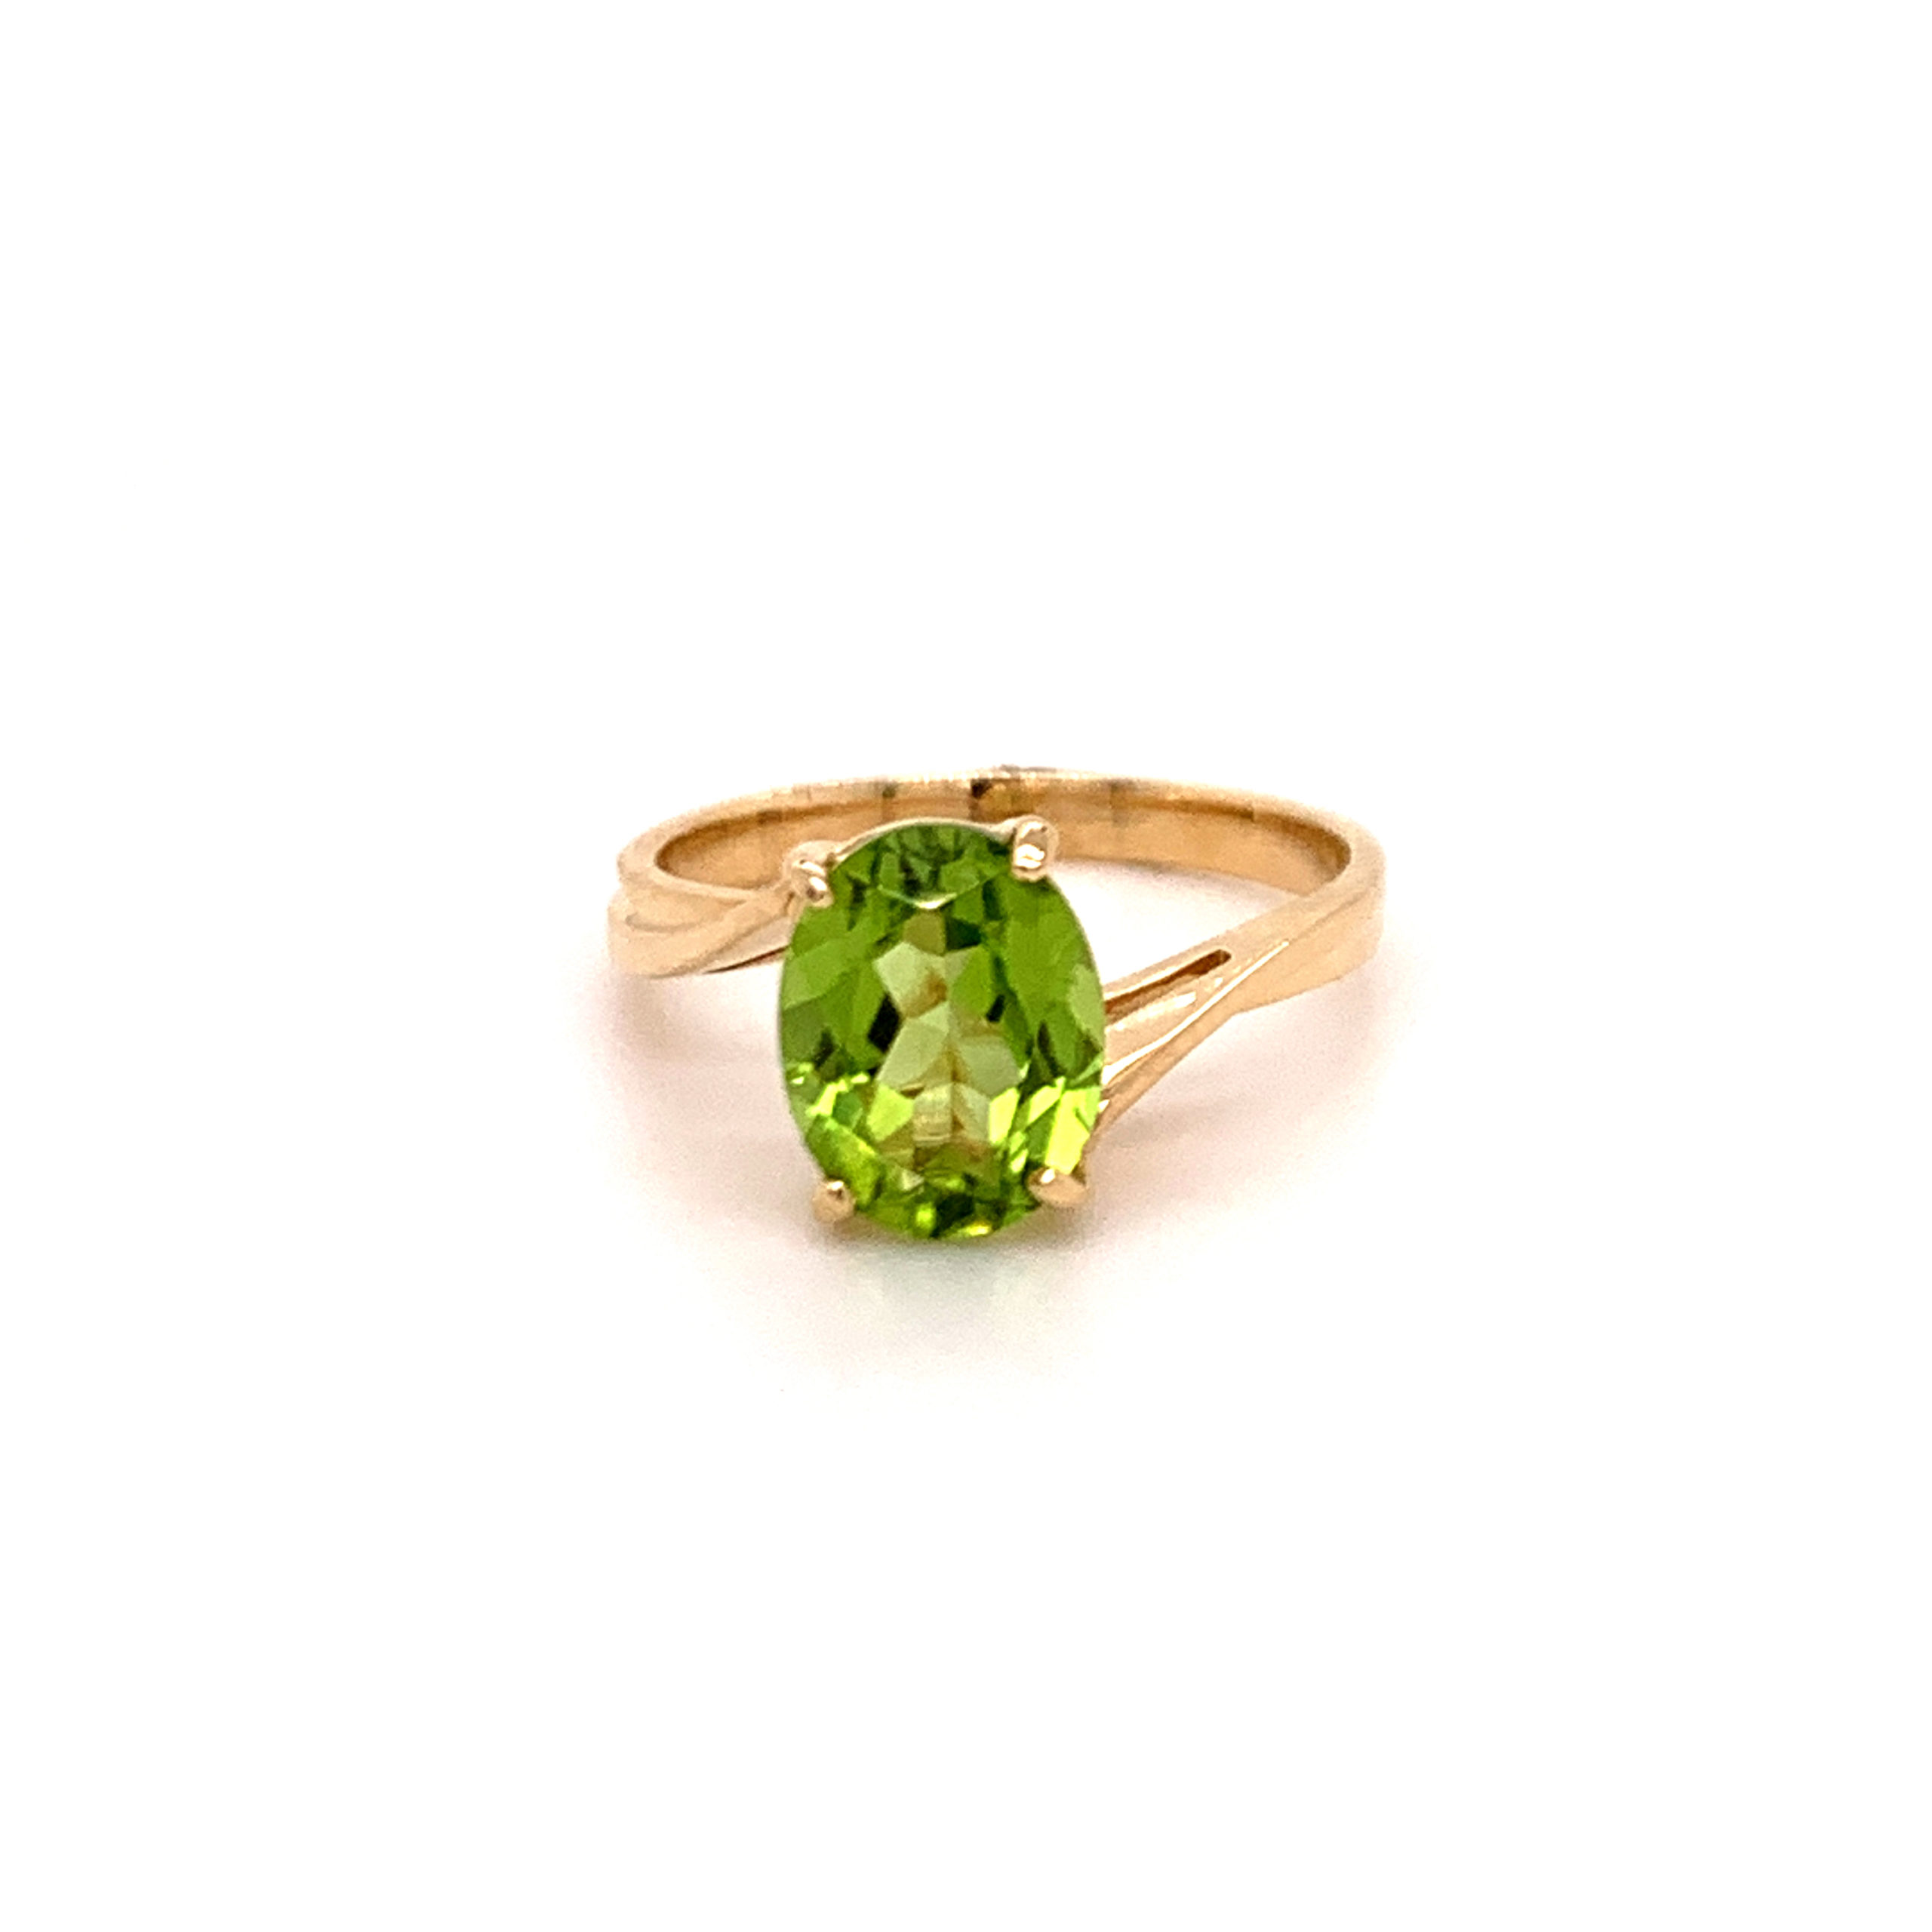 Gold Raw Peridot Ring| August Ring| Raw Stone Ring | – DaddyDaughterjewelry